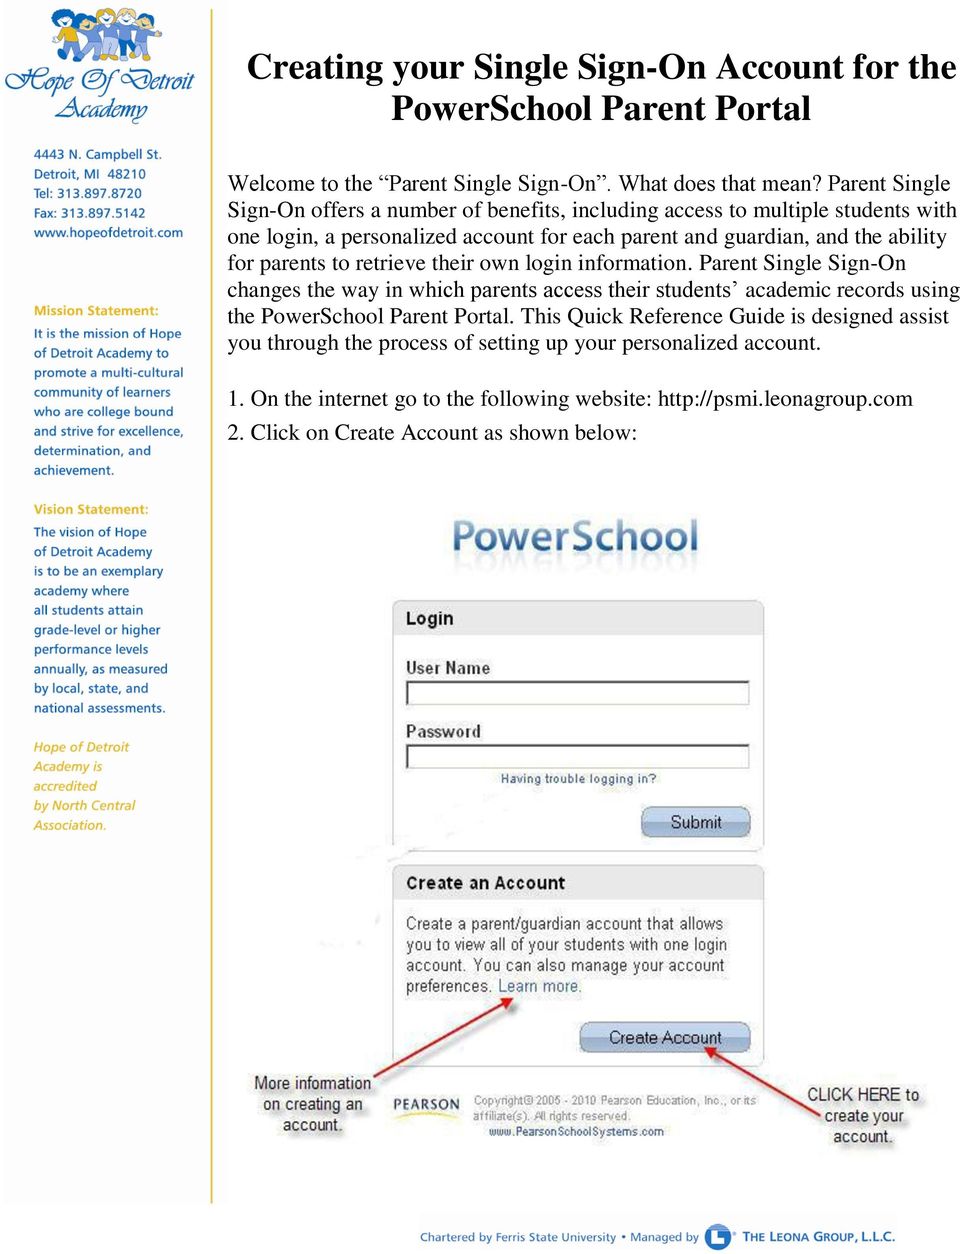 parents to retrieve their own login information. Parent Single Sign-On changes the way in which parents access their students academic records using the PowerSchool Parent Portal.